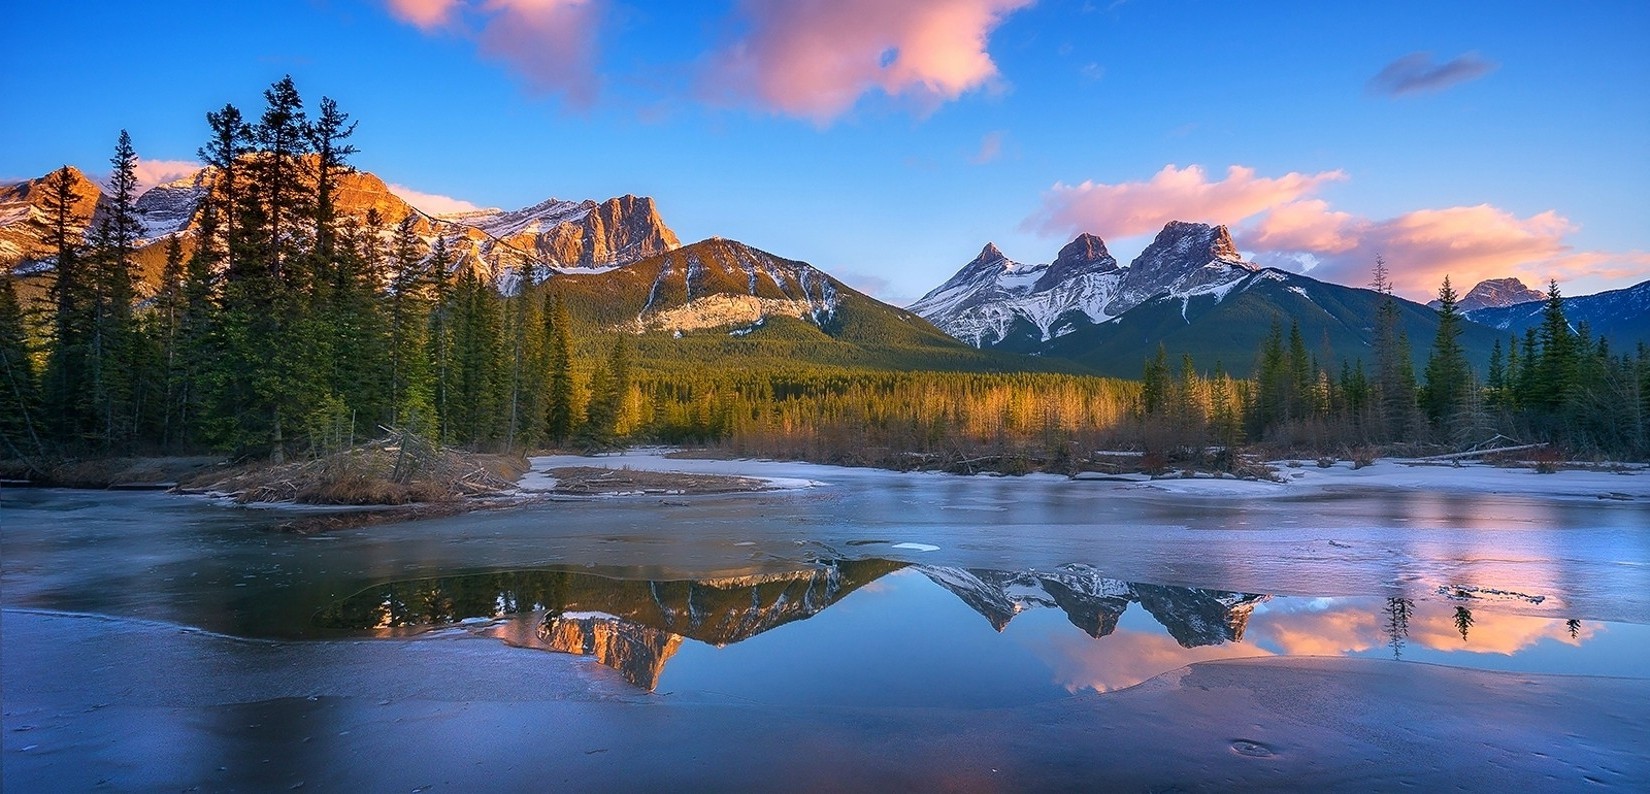 Canada, Sunrise, Mountain, Lake, Forest, Frost, Snowy Peak, Clouds, Reflection, Nature, Landscape Wallpaper